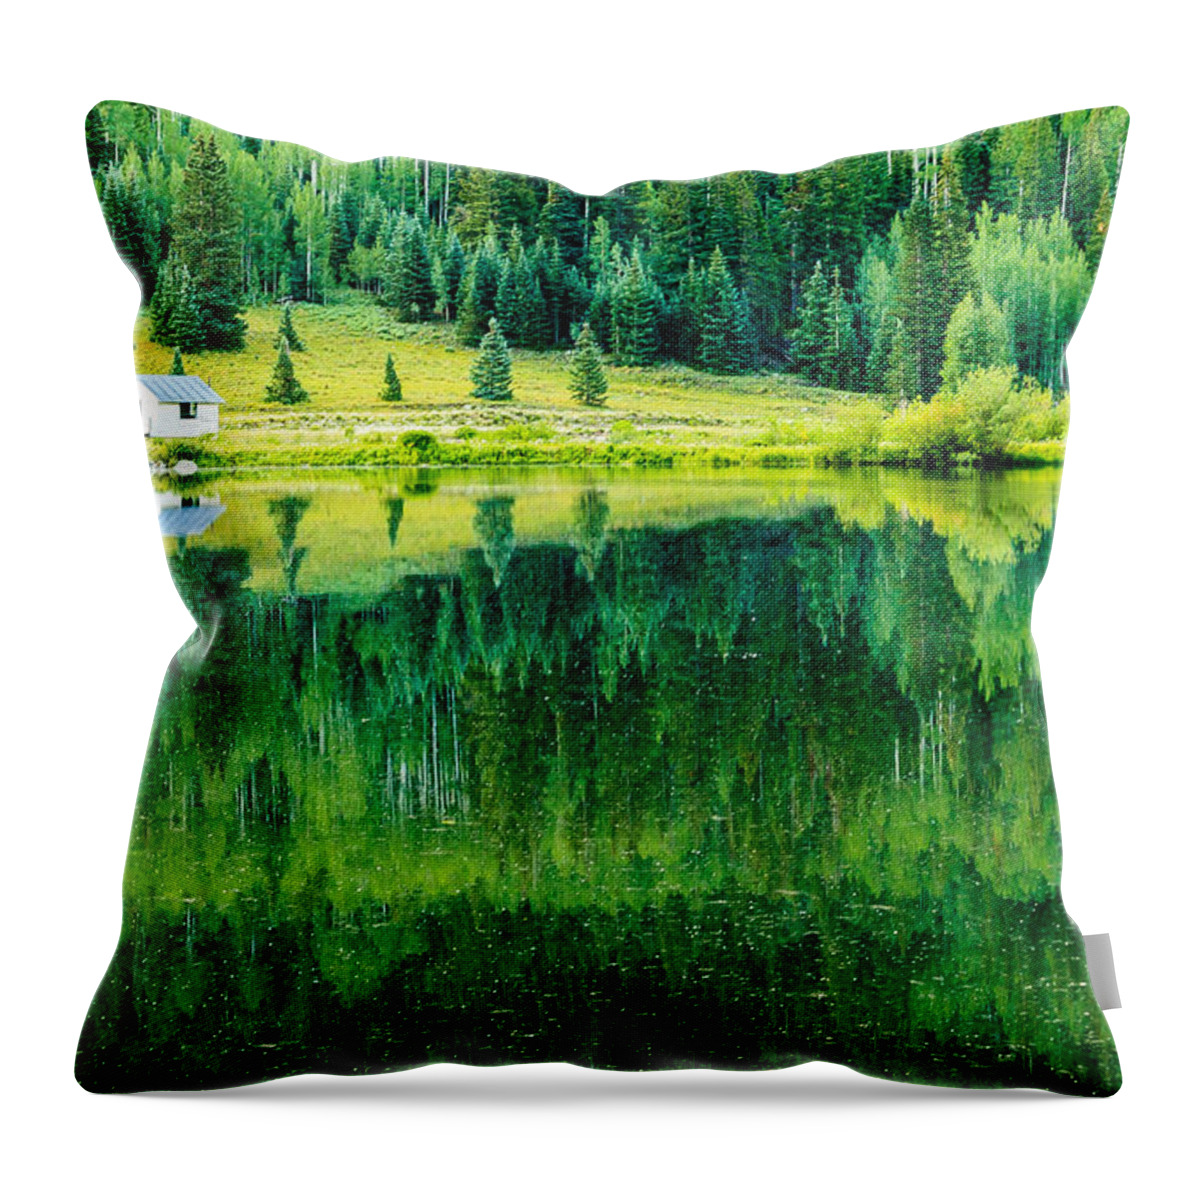 Jay Stockhaus Throw Pillow featuring the photograph Crystal Lake by Jay Stockhaus